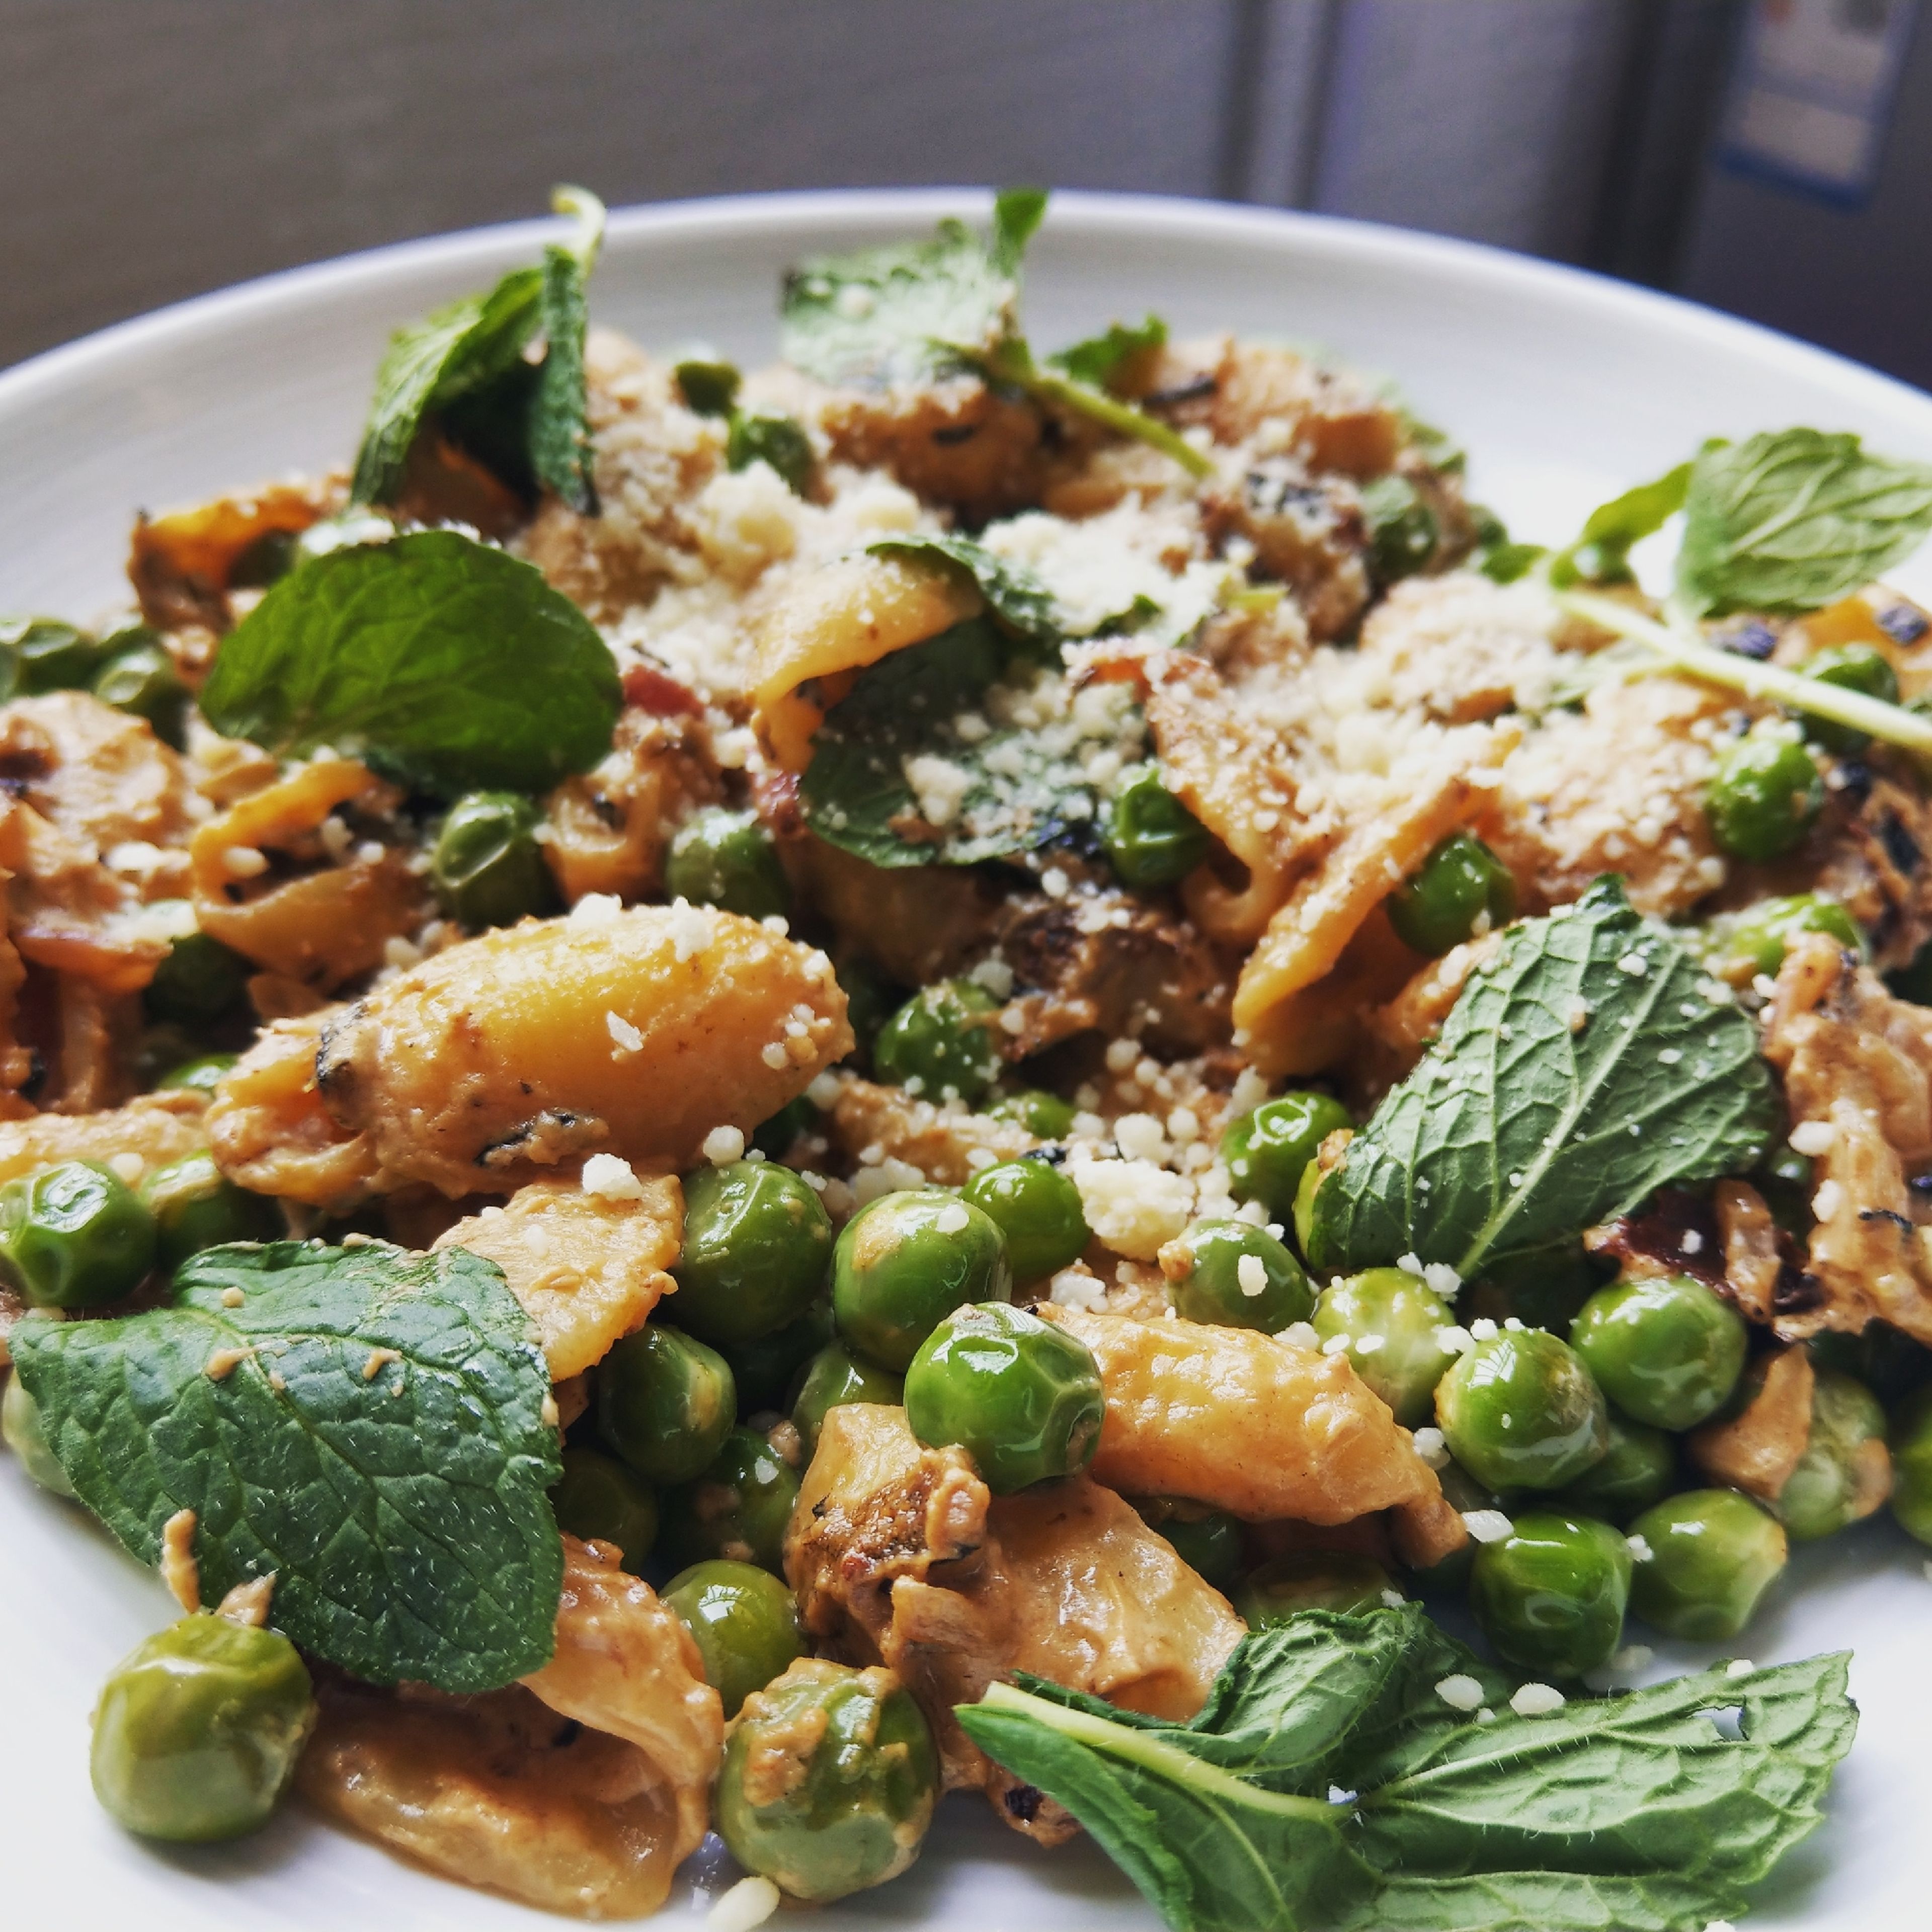 Spring pasta with peas and mint